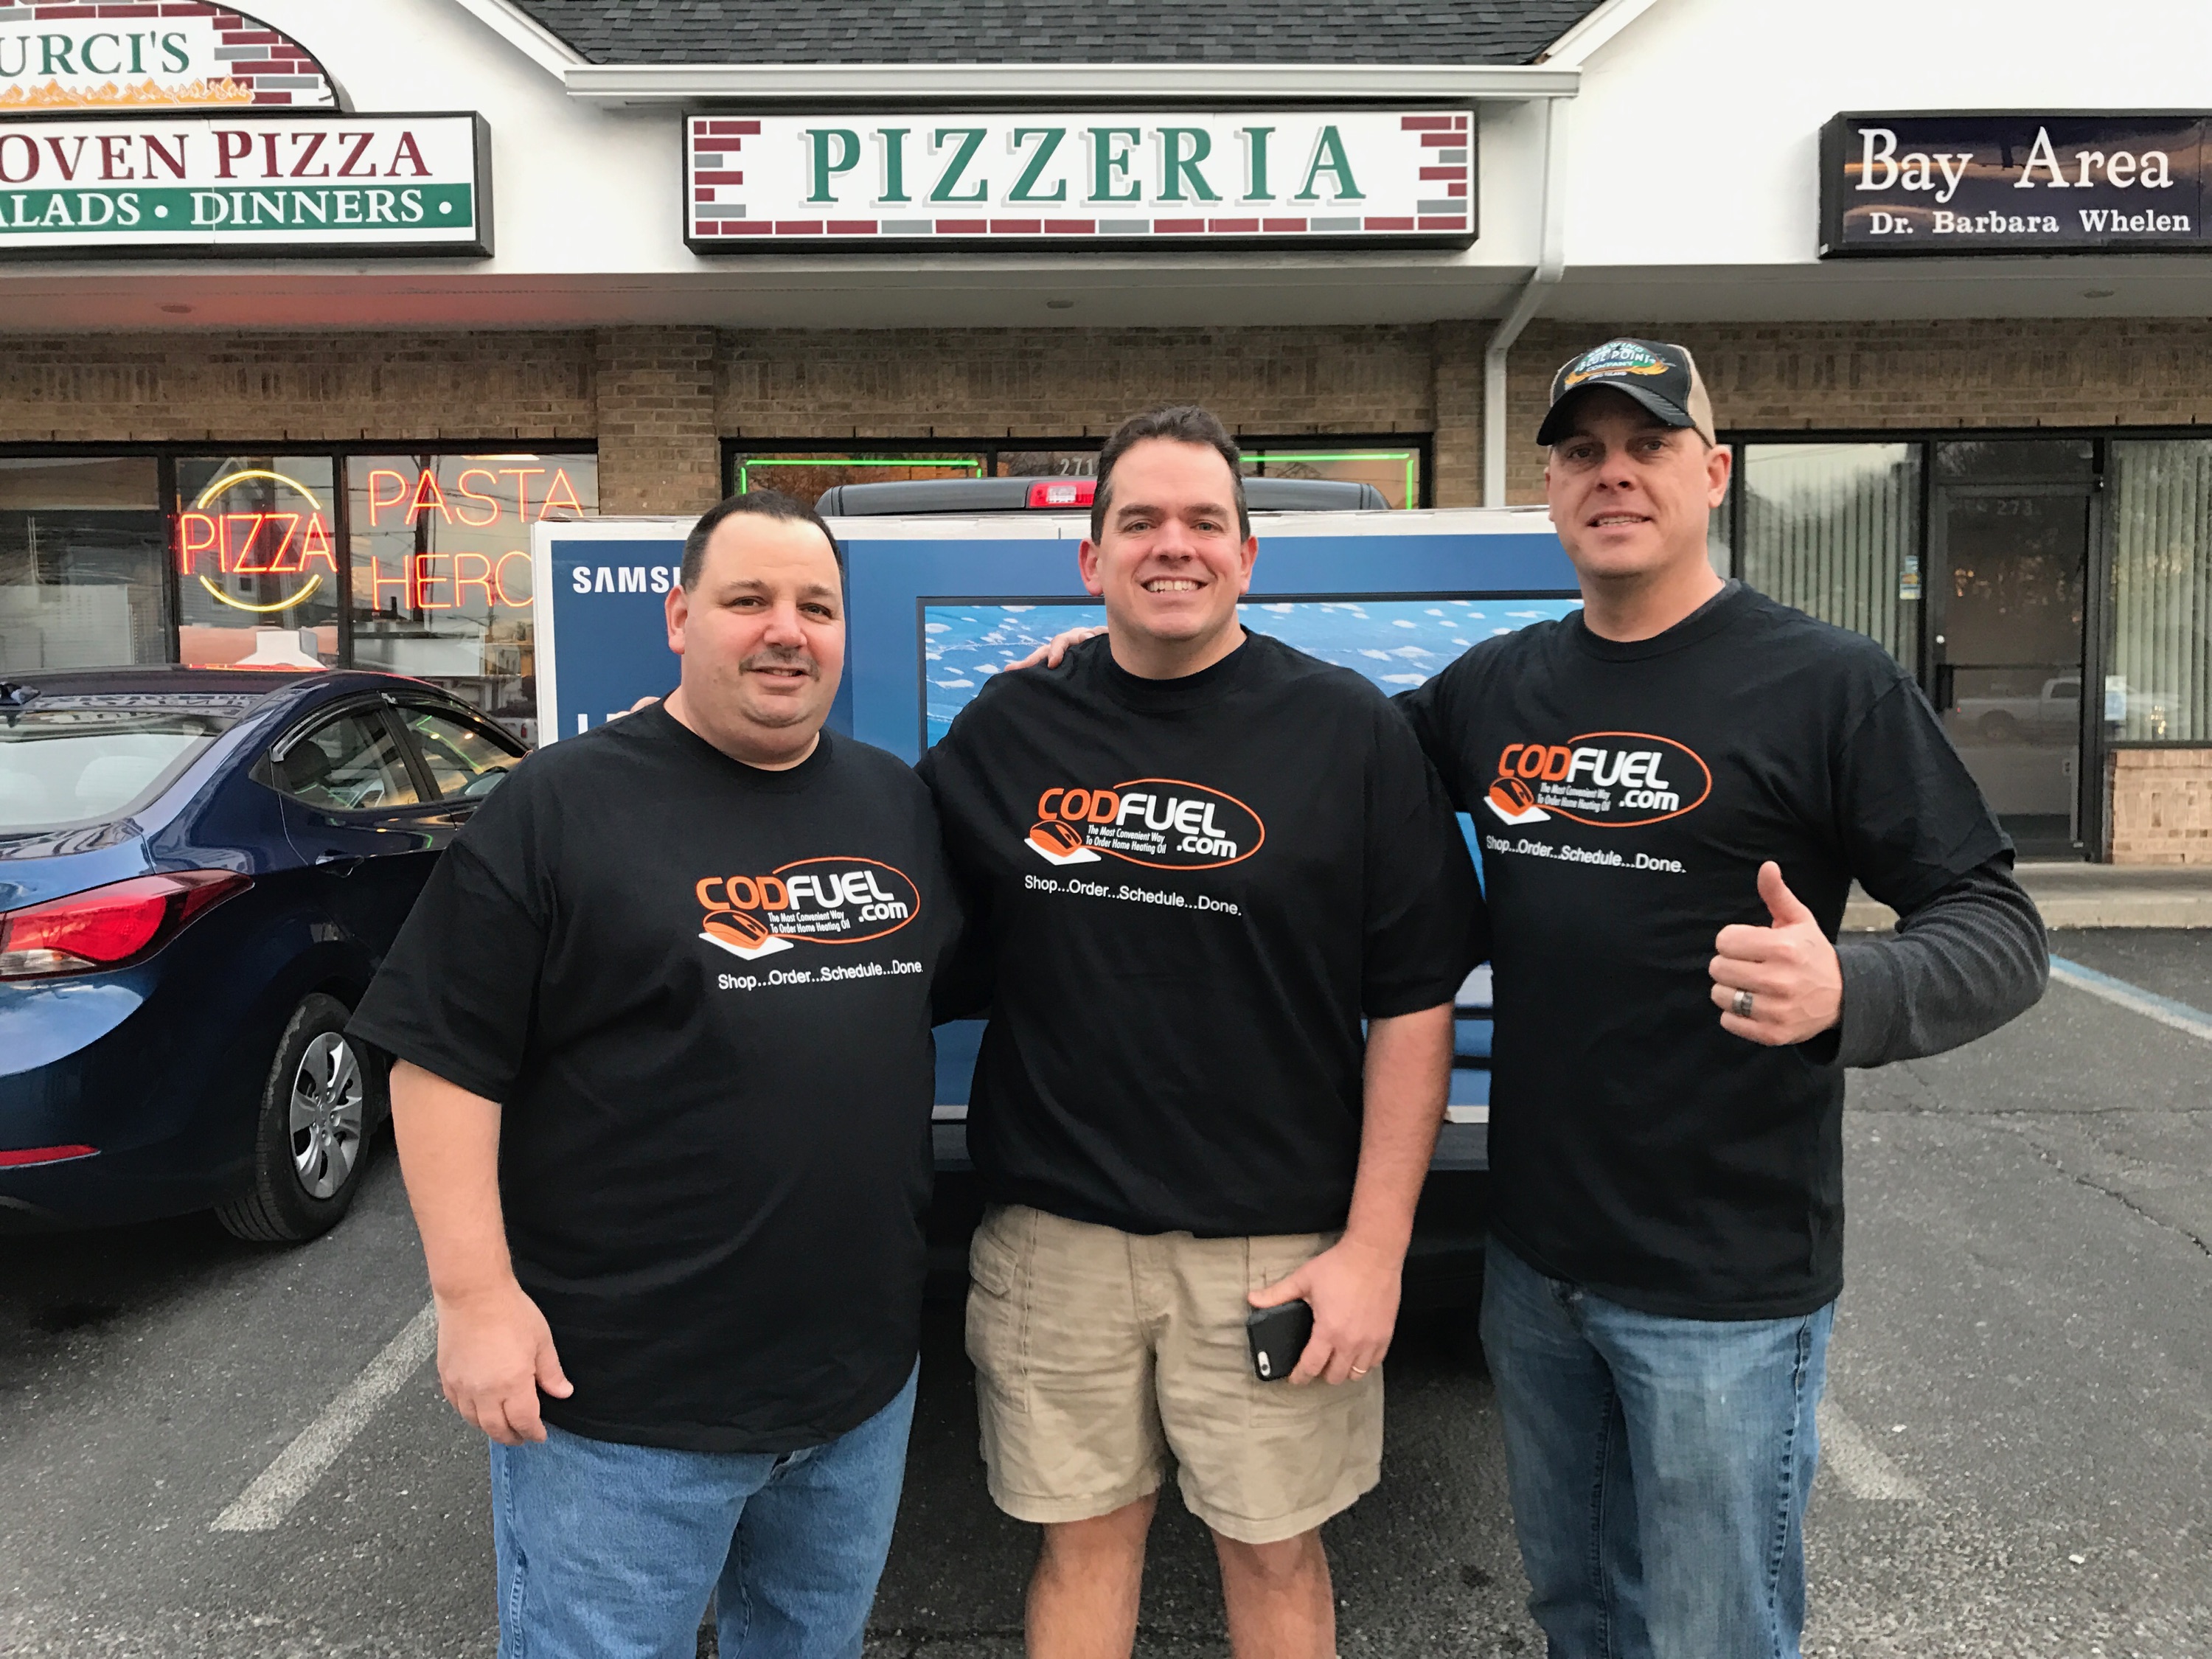 CODFUEL.com, Furci Pizza and Wise Choice Fuel Prize Winner